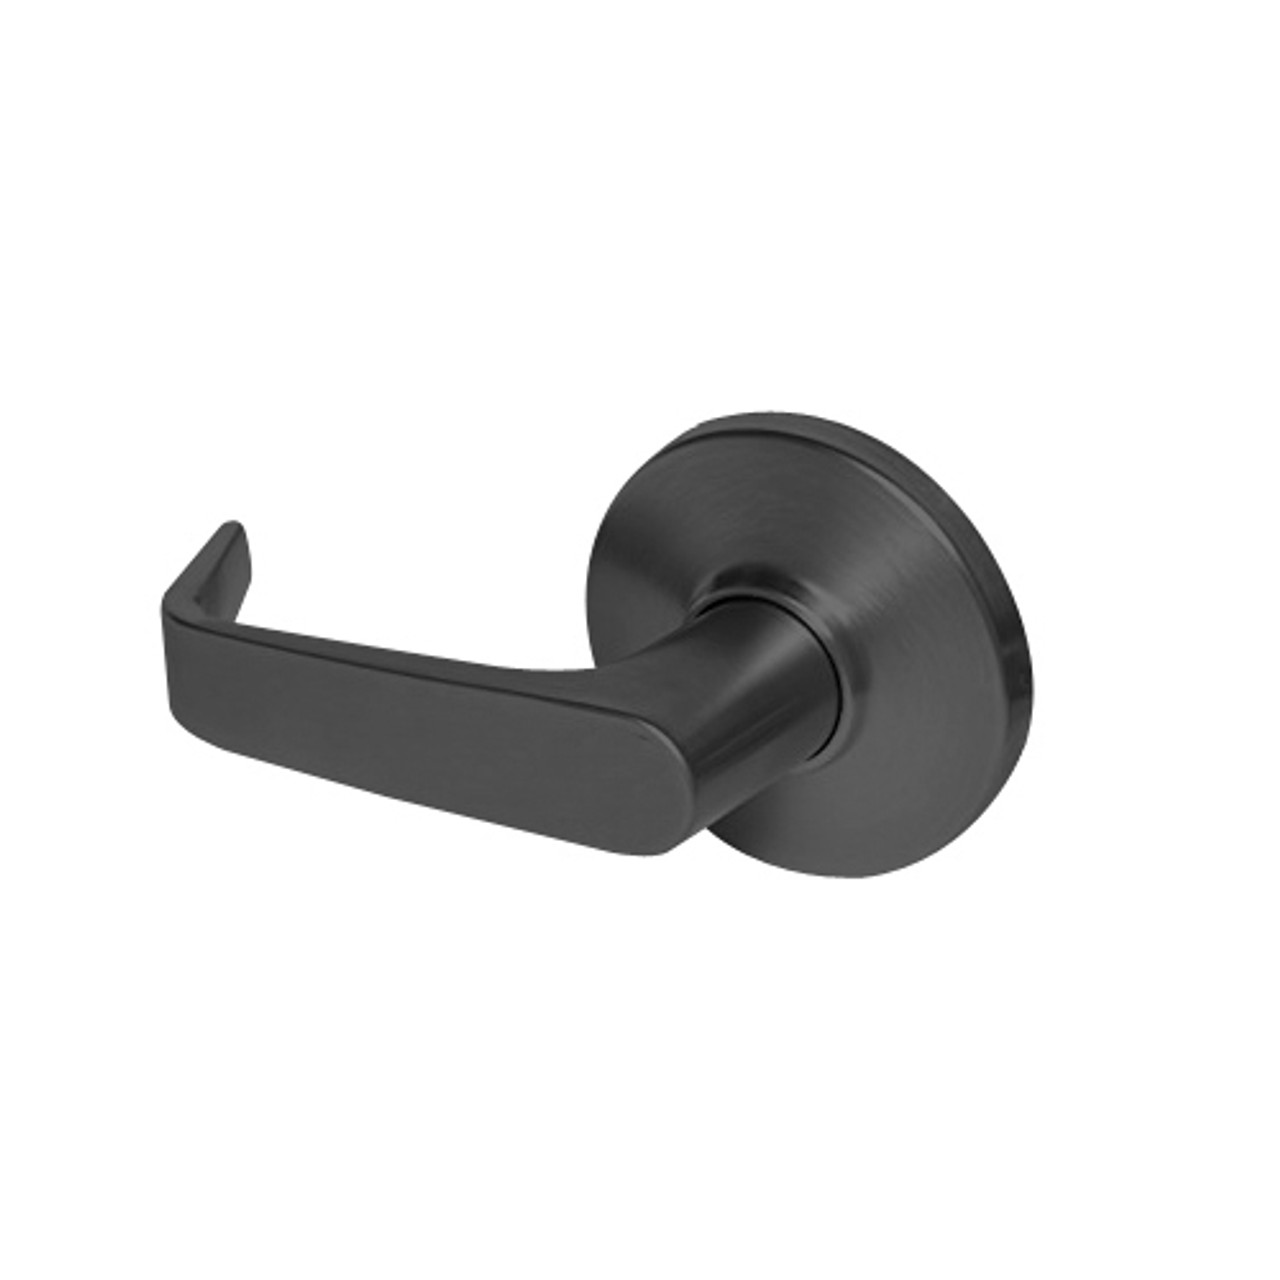 9K30Z15DSTK622 Best 9K Series Closet Heavy Duty Cylindrical Lever Locks with Contour Angle with Return Lever Design in Black